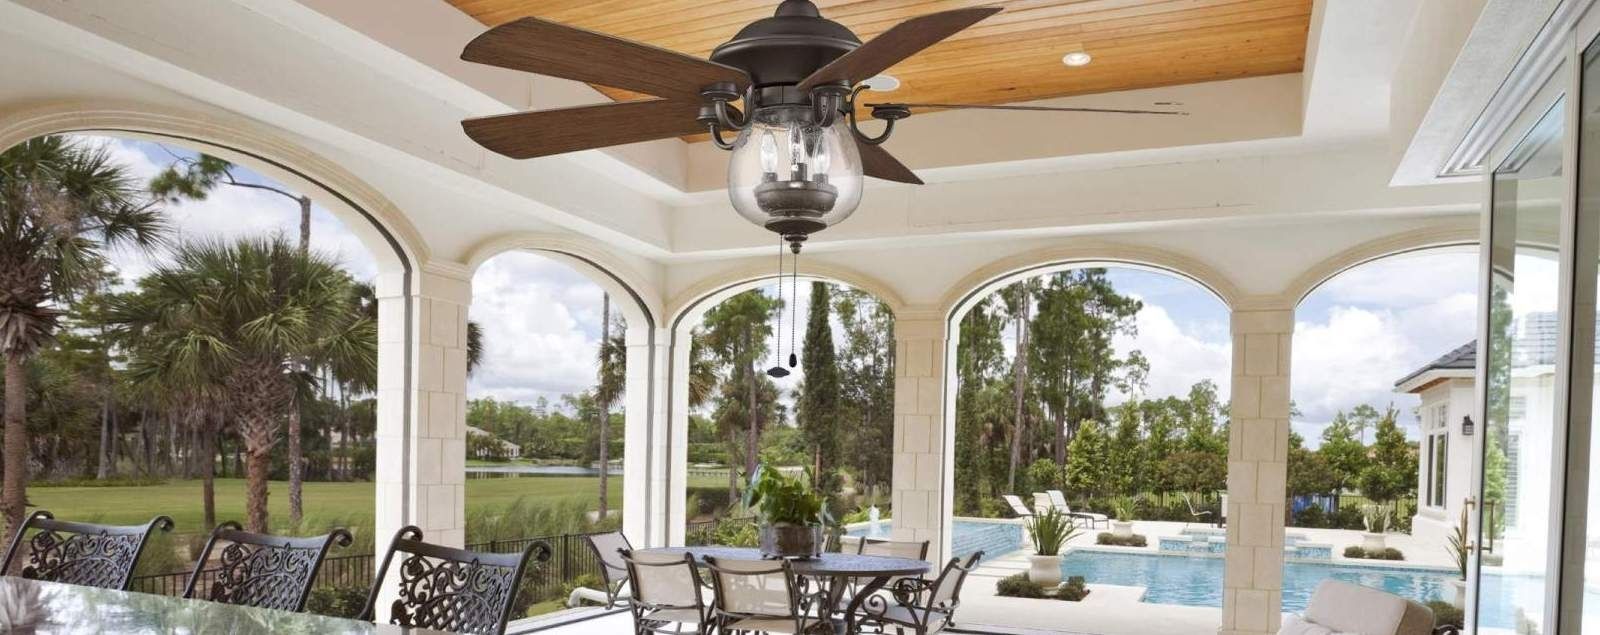 Outdoor Ceiling Fans For High Wind Areas With Favorite Outdoor Ceiling Fans – Shop Wet, Dry, And Damp Rated Outdoor Fans (View 1 of 20)